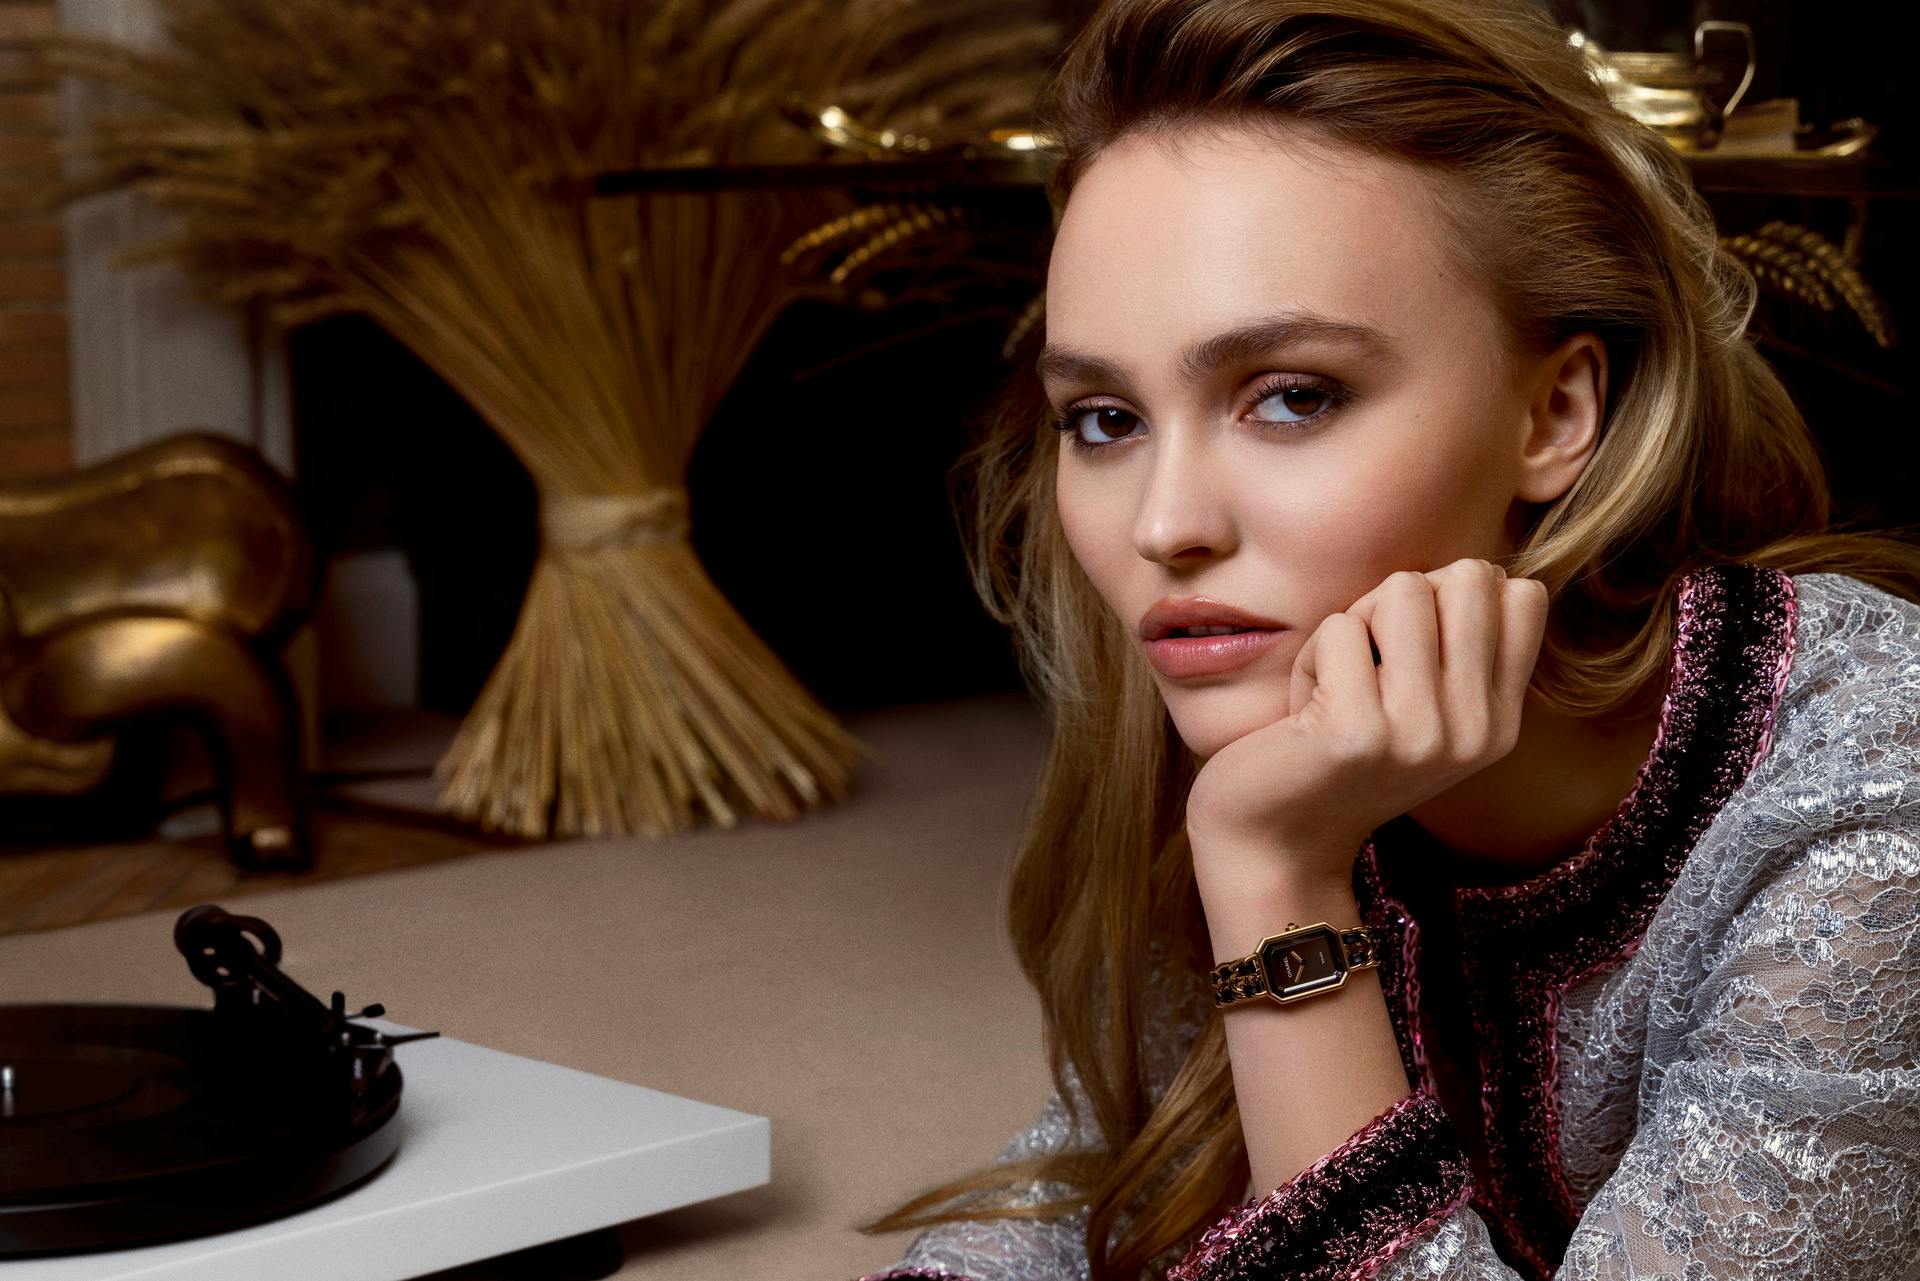 Lily-Rose Depp is the muse of Chanel's Première Édition Originale